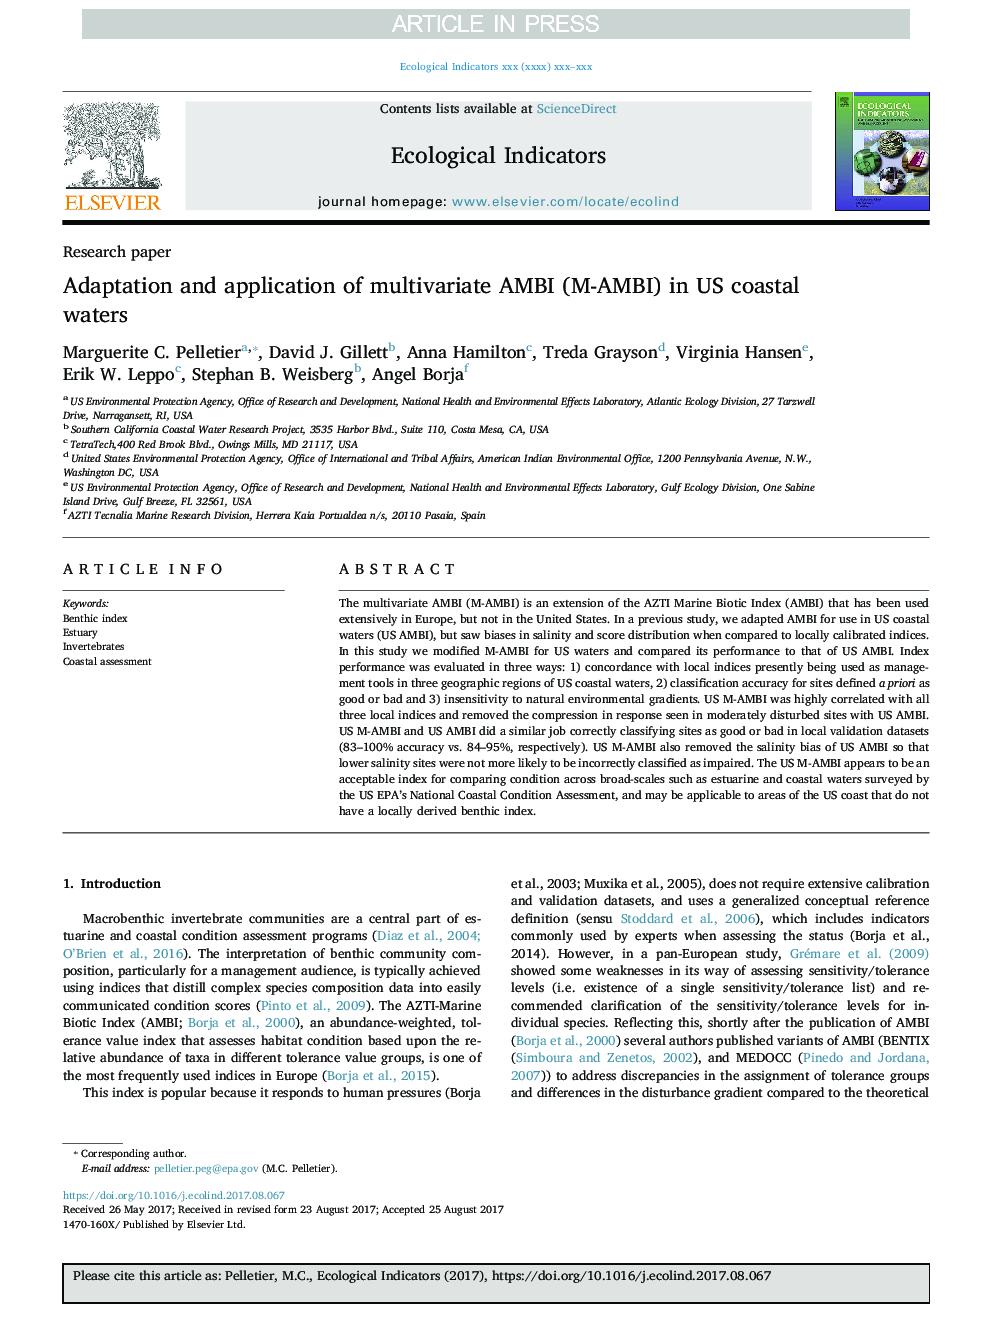 Adaptation and application of multivariate AMBI (M-AMBI) in US coastal waters